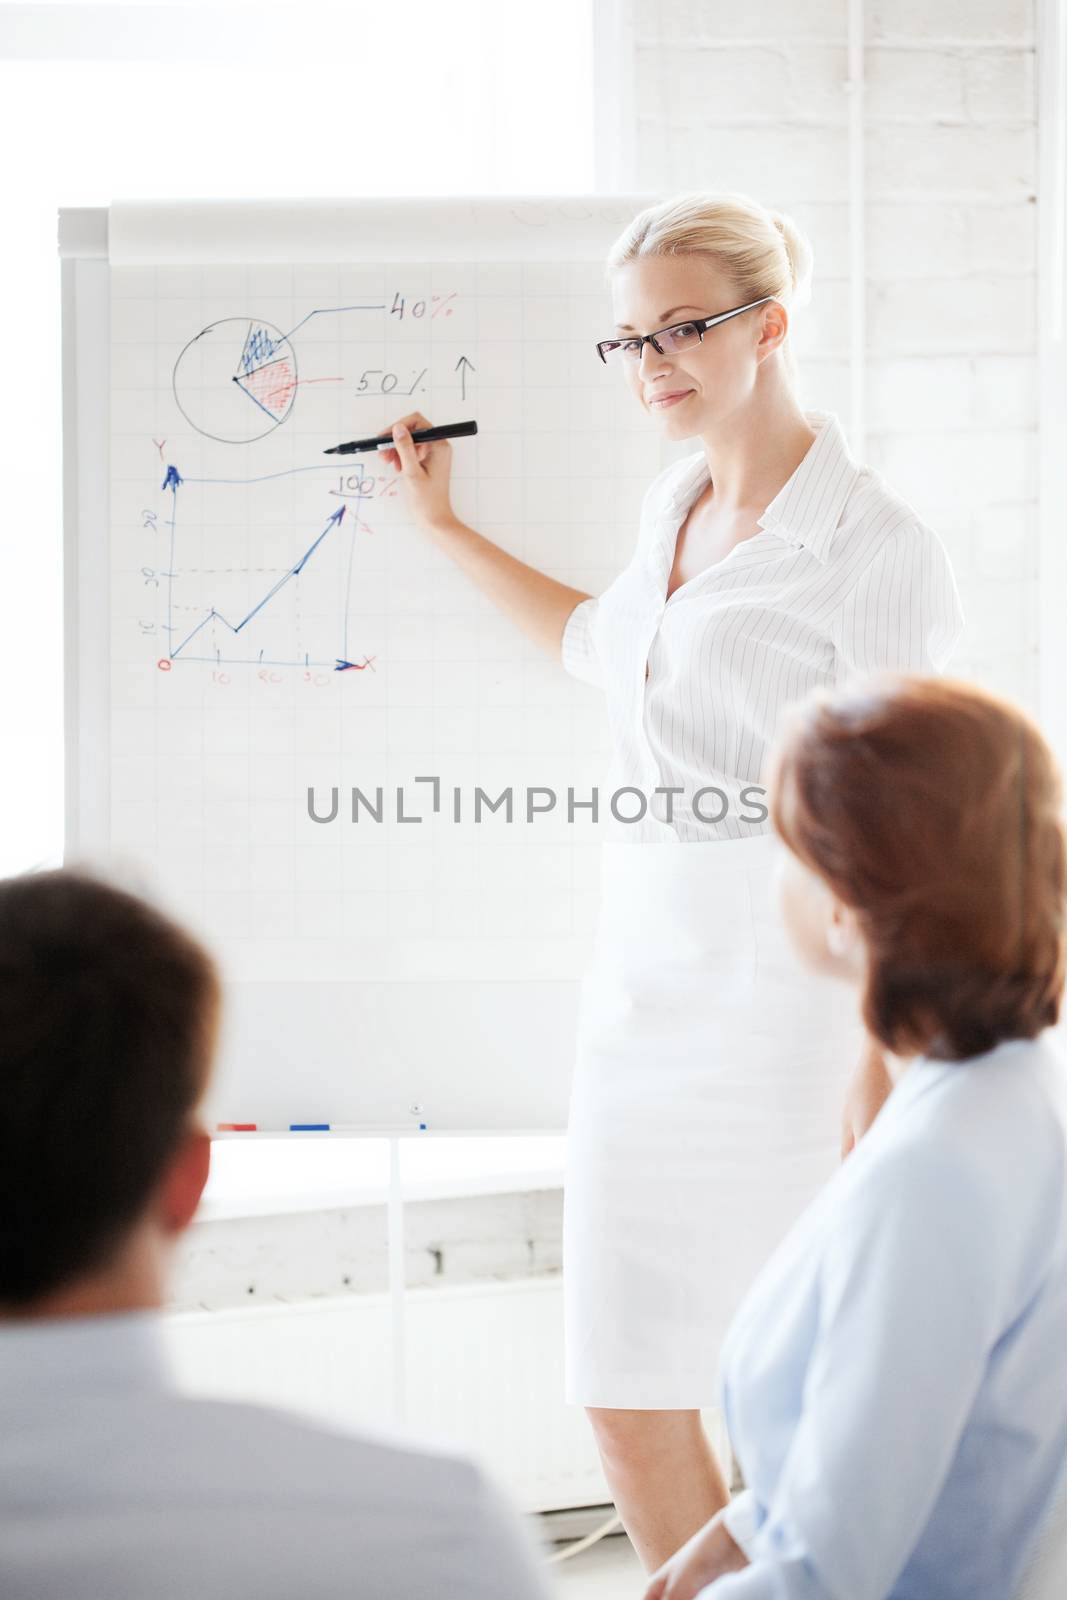 business concept - businesswoman pointing at graph on flip board in office